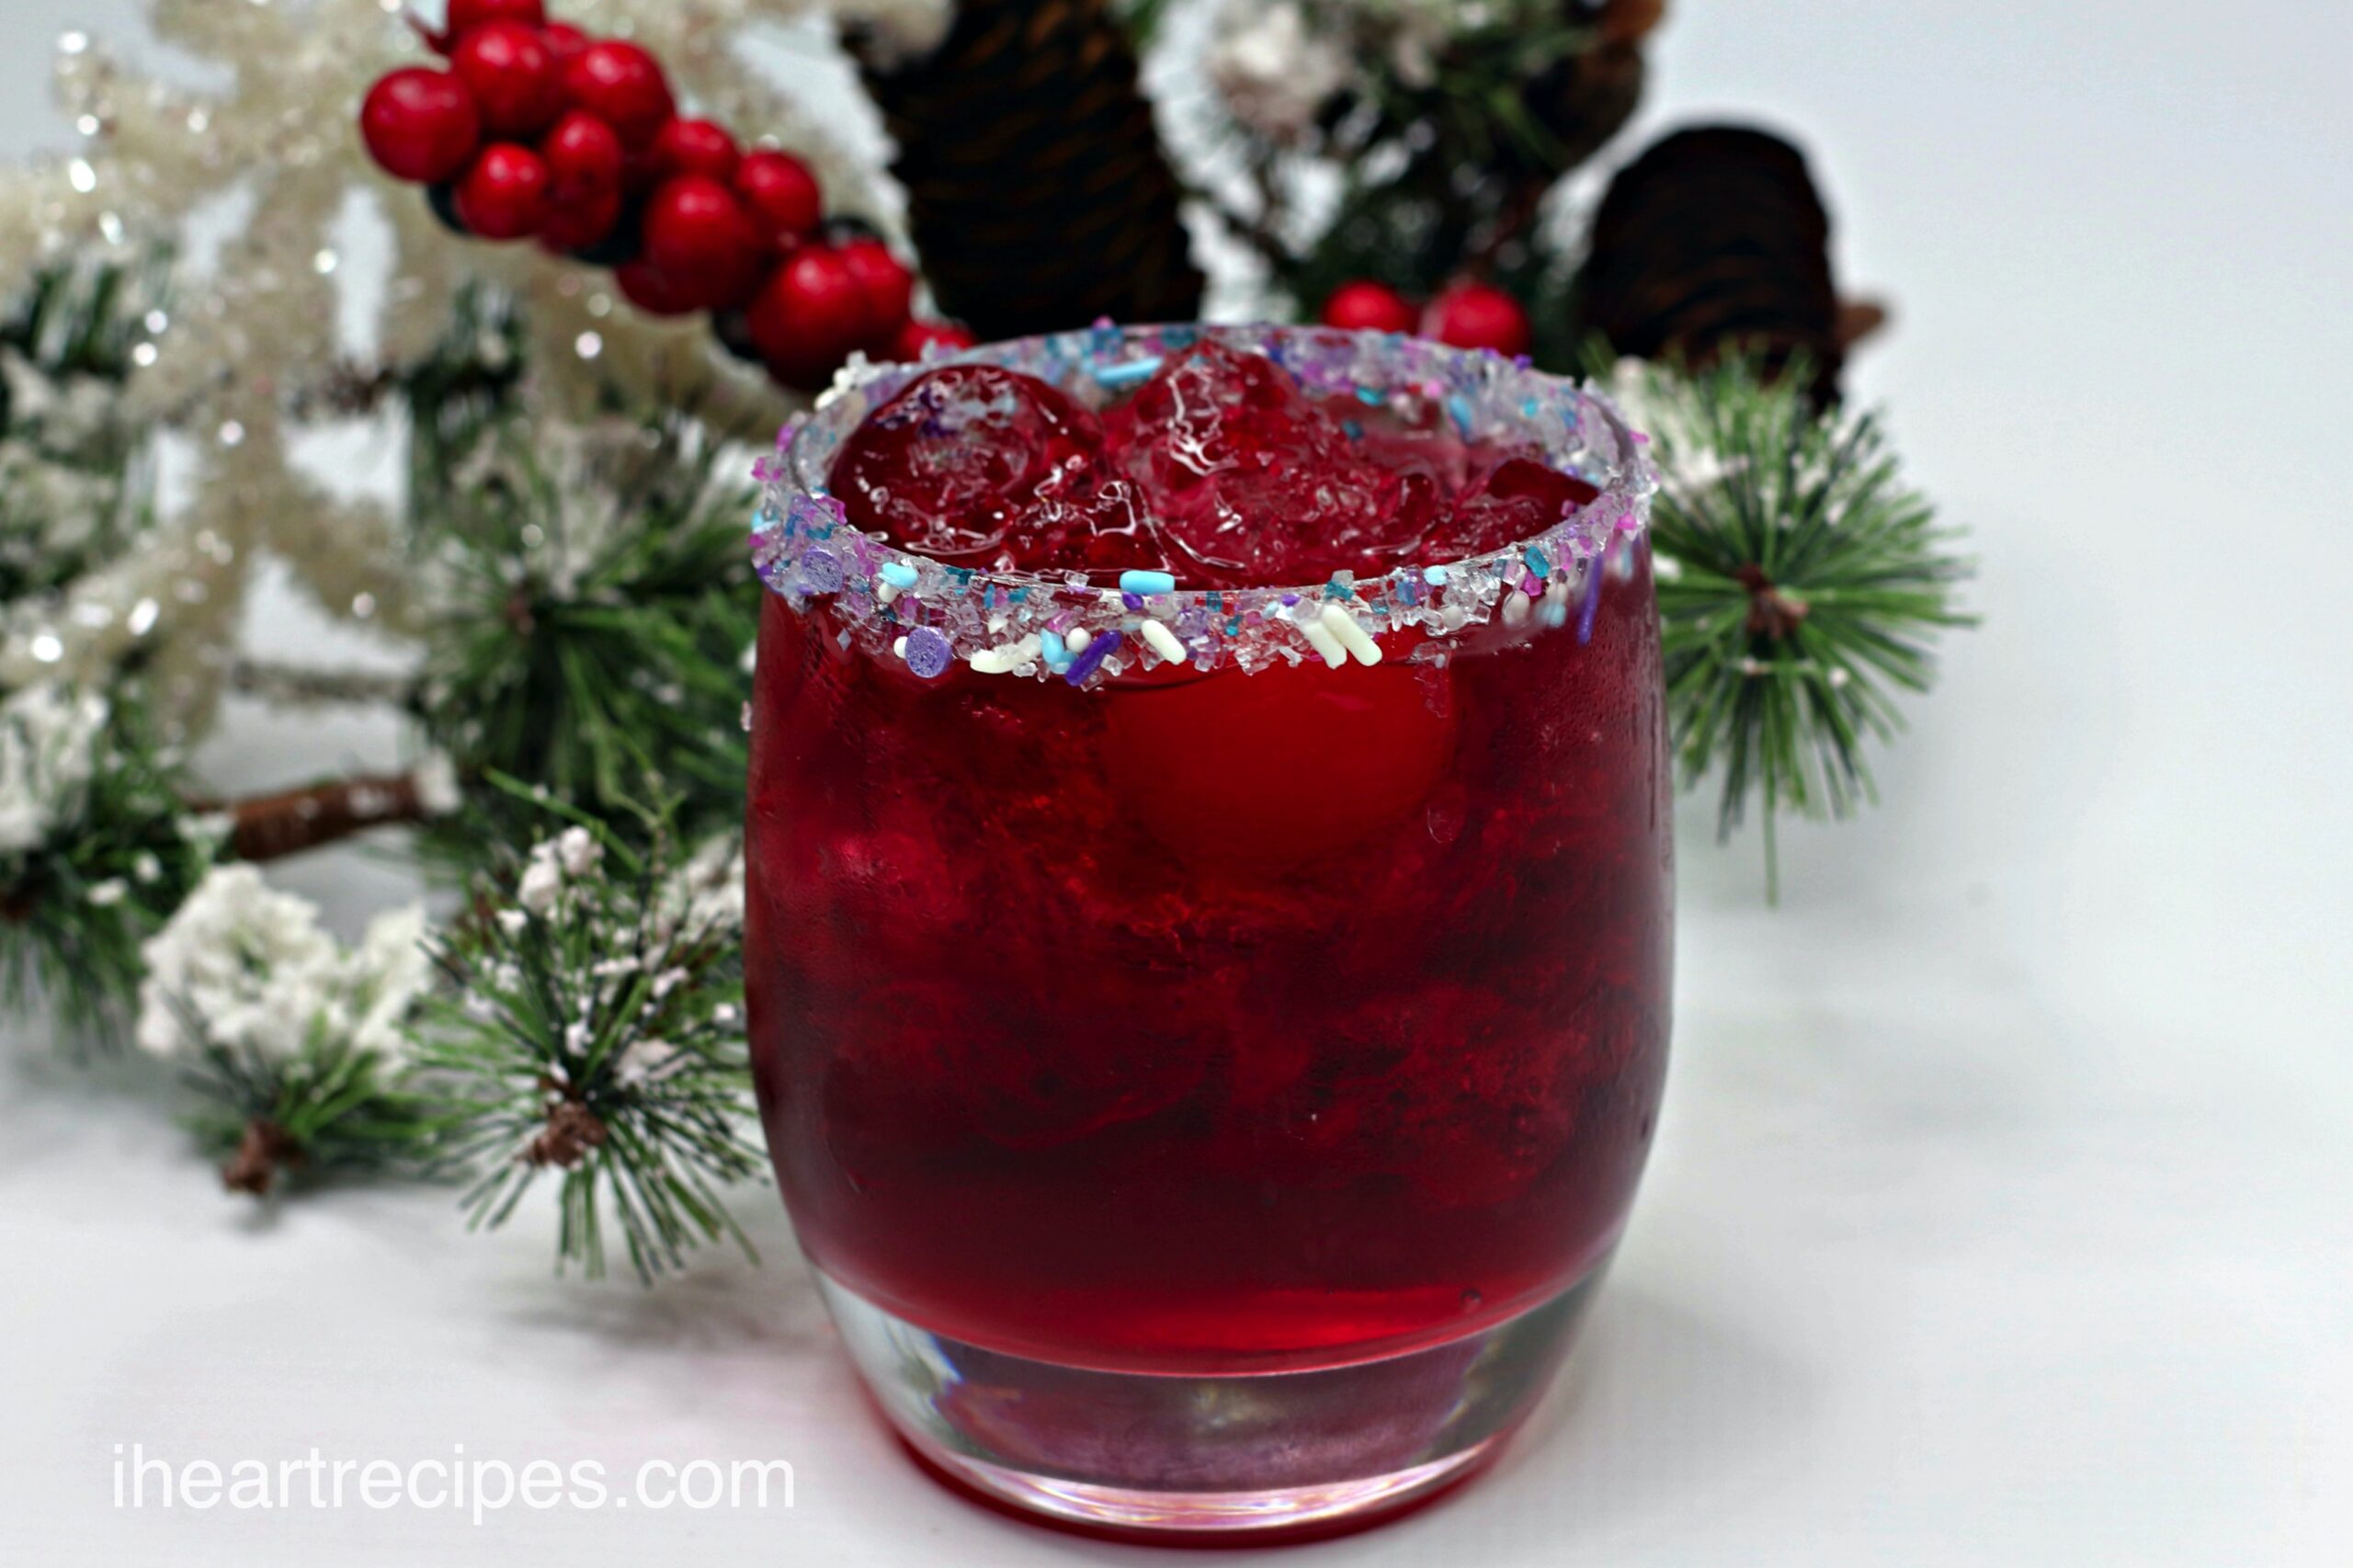 A Christmas cocktail made with gin, vodka, fruit punch, and Sprite.